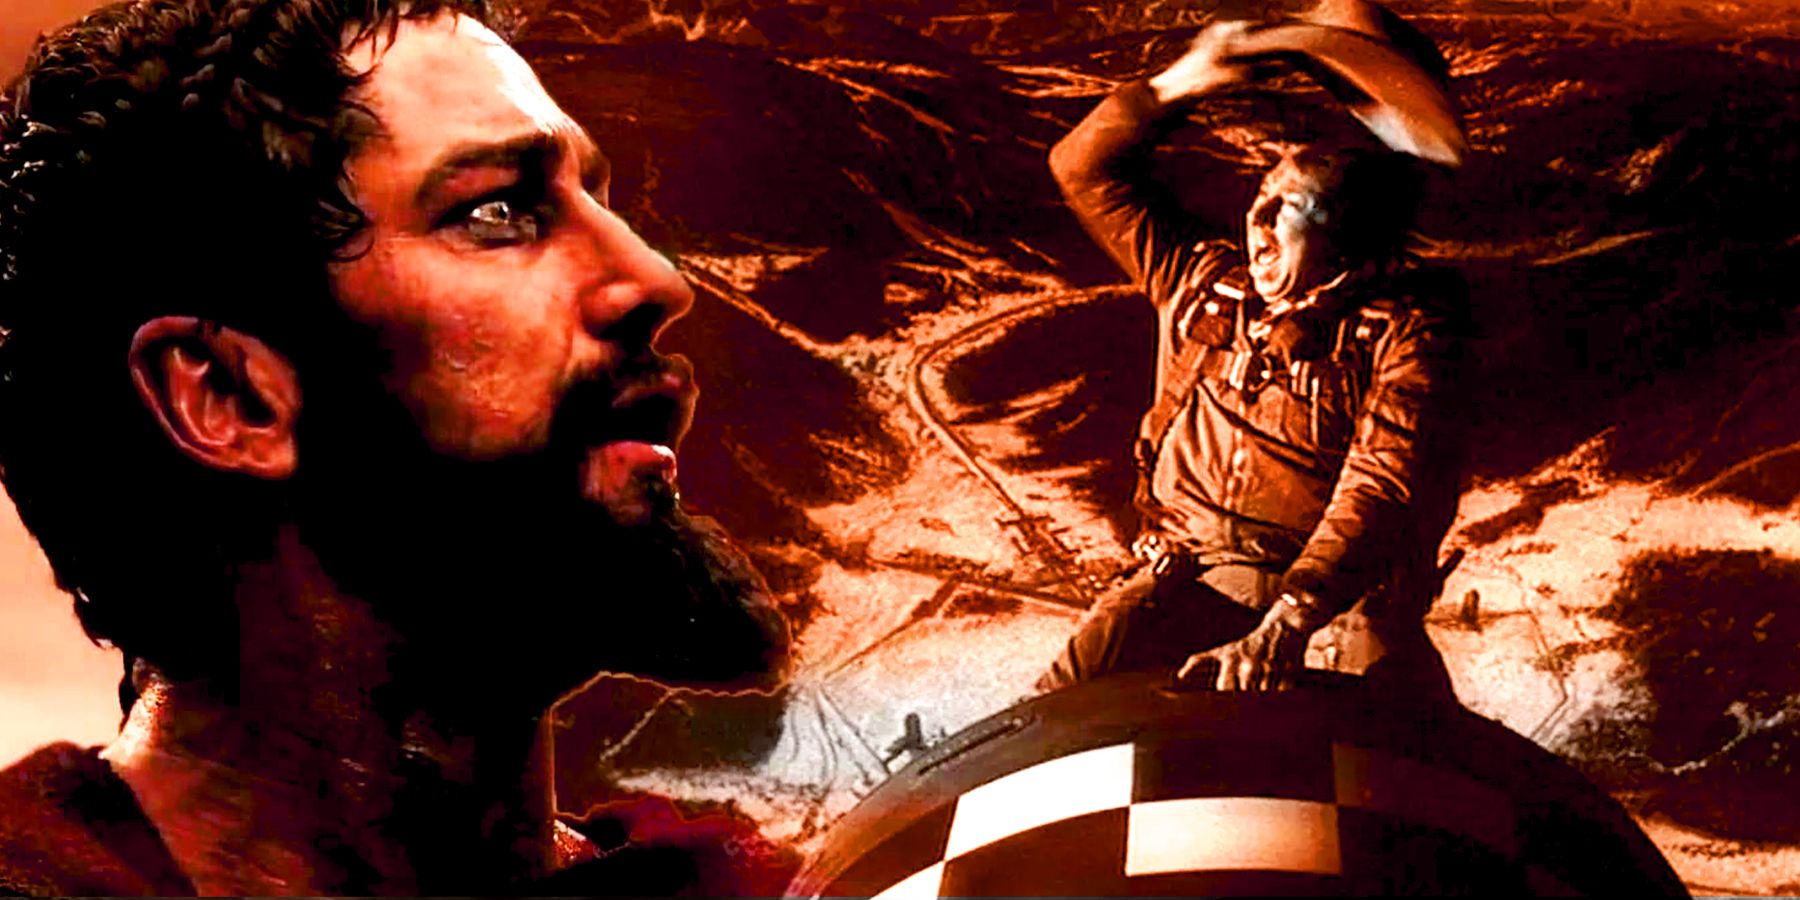 A collage image of Leonidas from 300 and and Kong from Dr. Strangelove riding the bomb